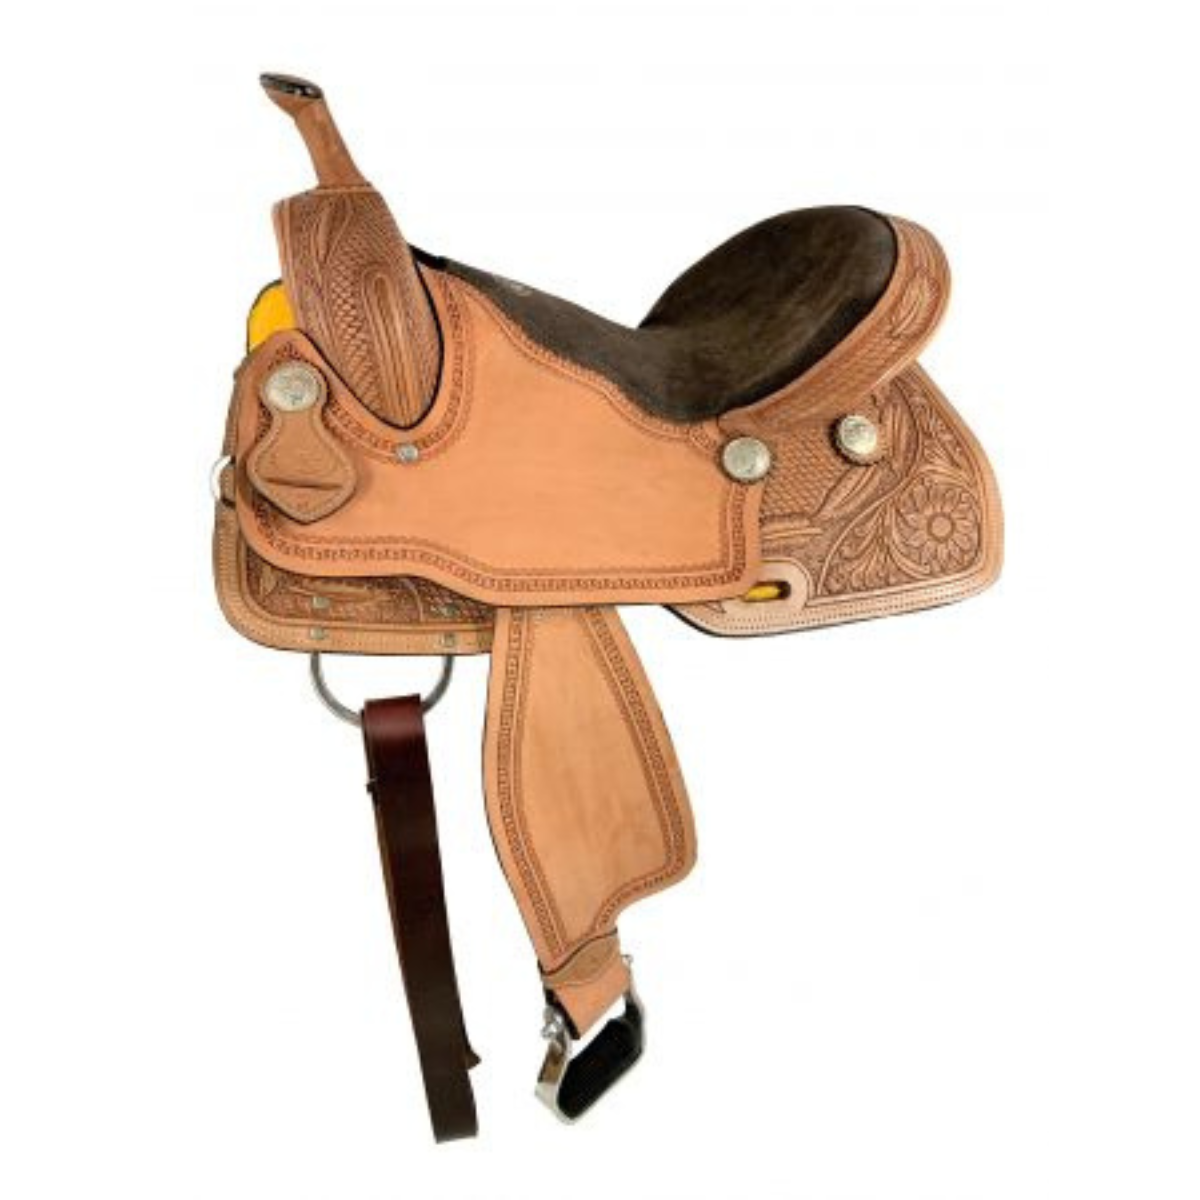 16" Double T combo basketweave/floral tooling Barrel Saddle Set with Brown Suede Seat - Double T Saddles